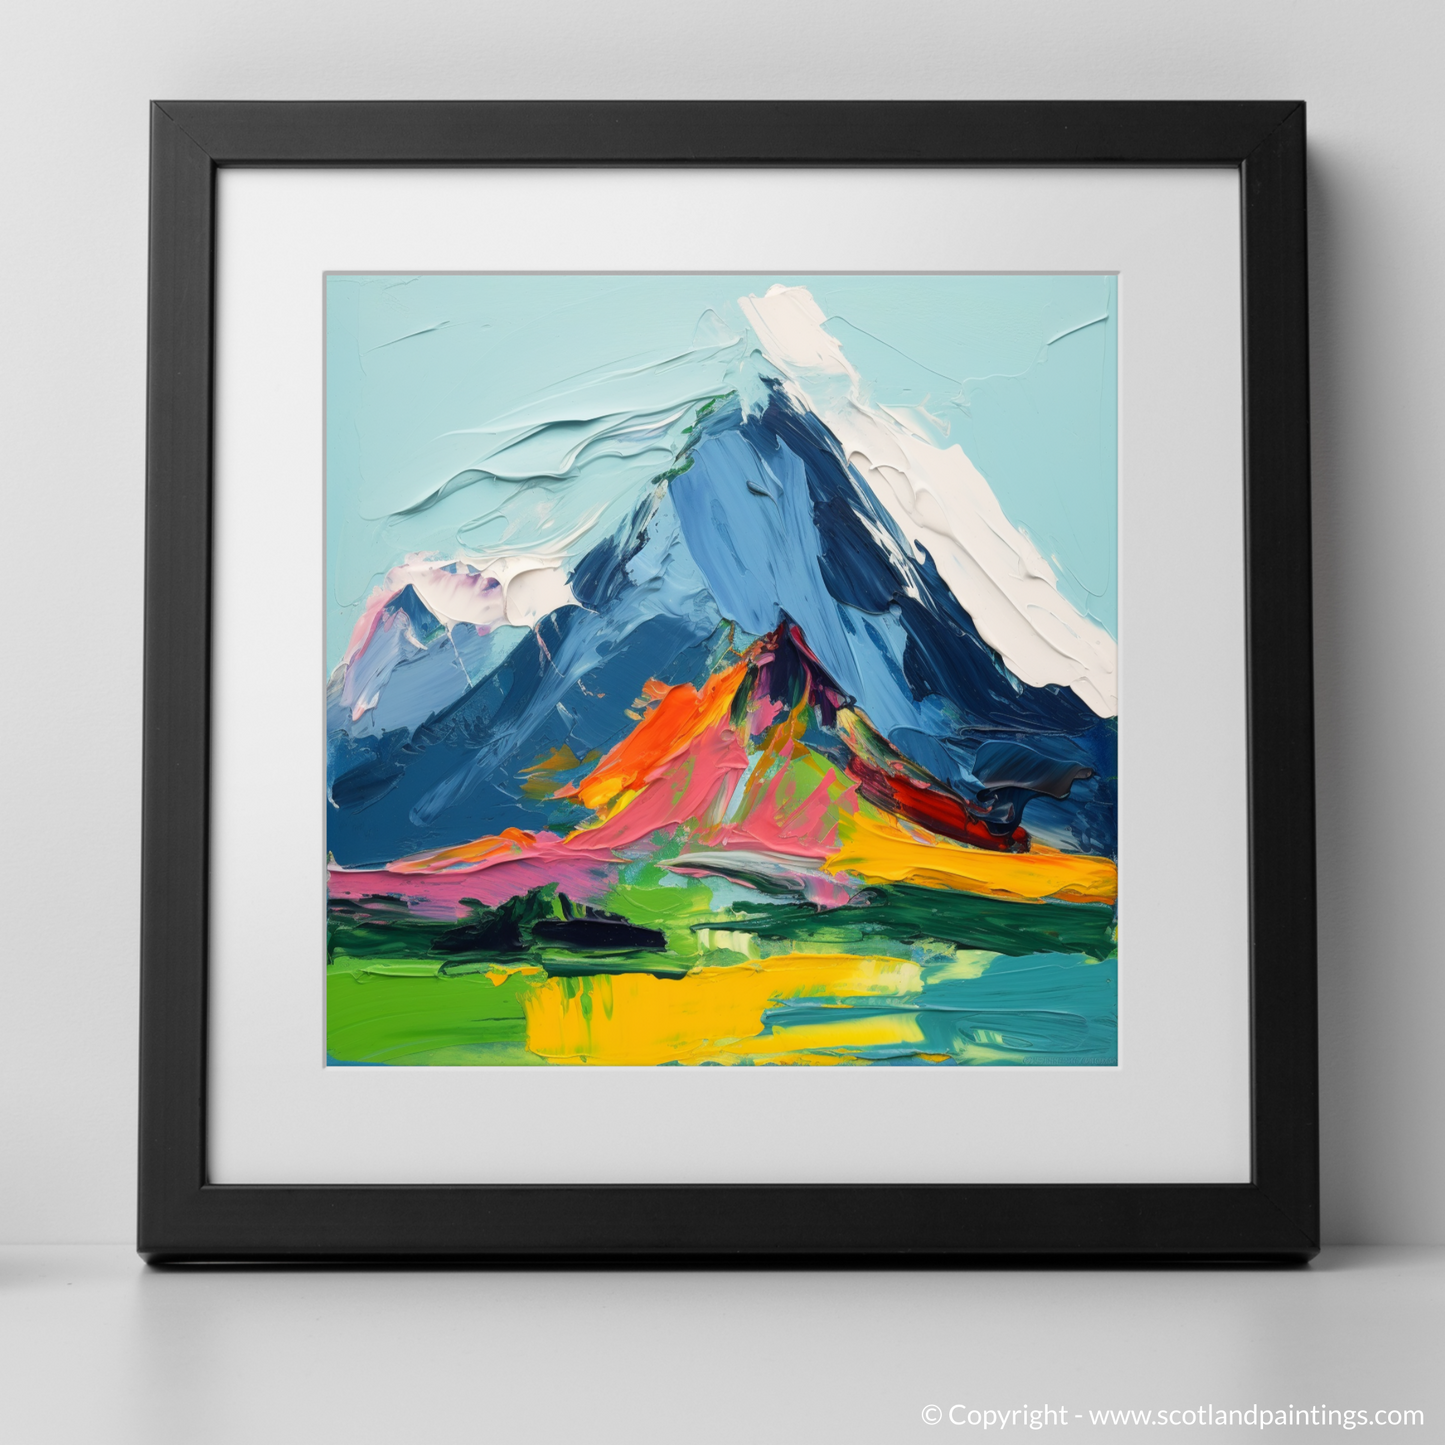 Highland Hues: An Abstract Tribute to Sgurr na Ciche